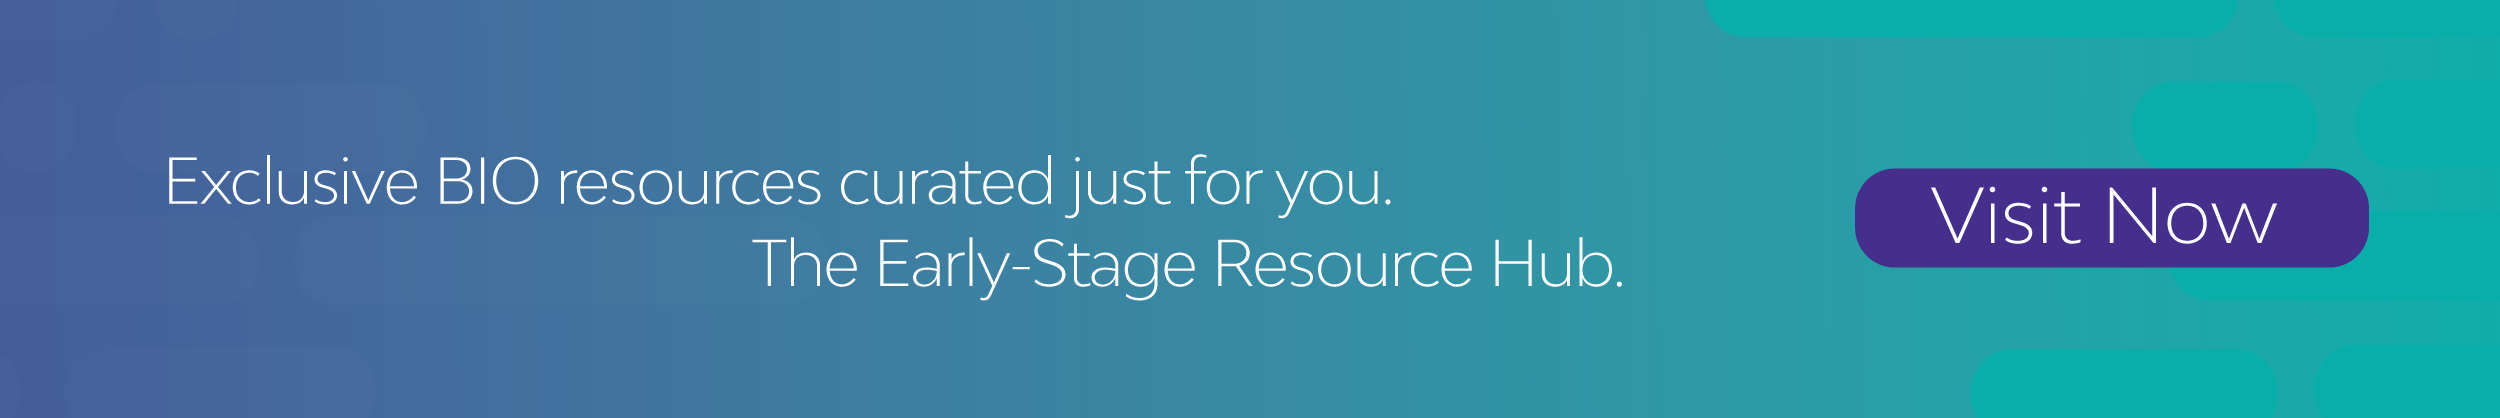 Learn more about BIO's Early-Stage Resource Hub.